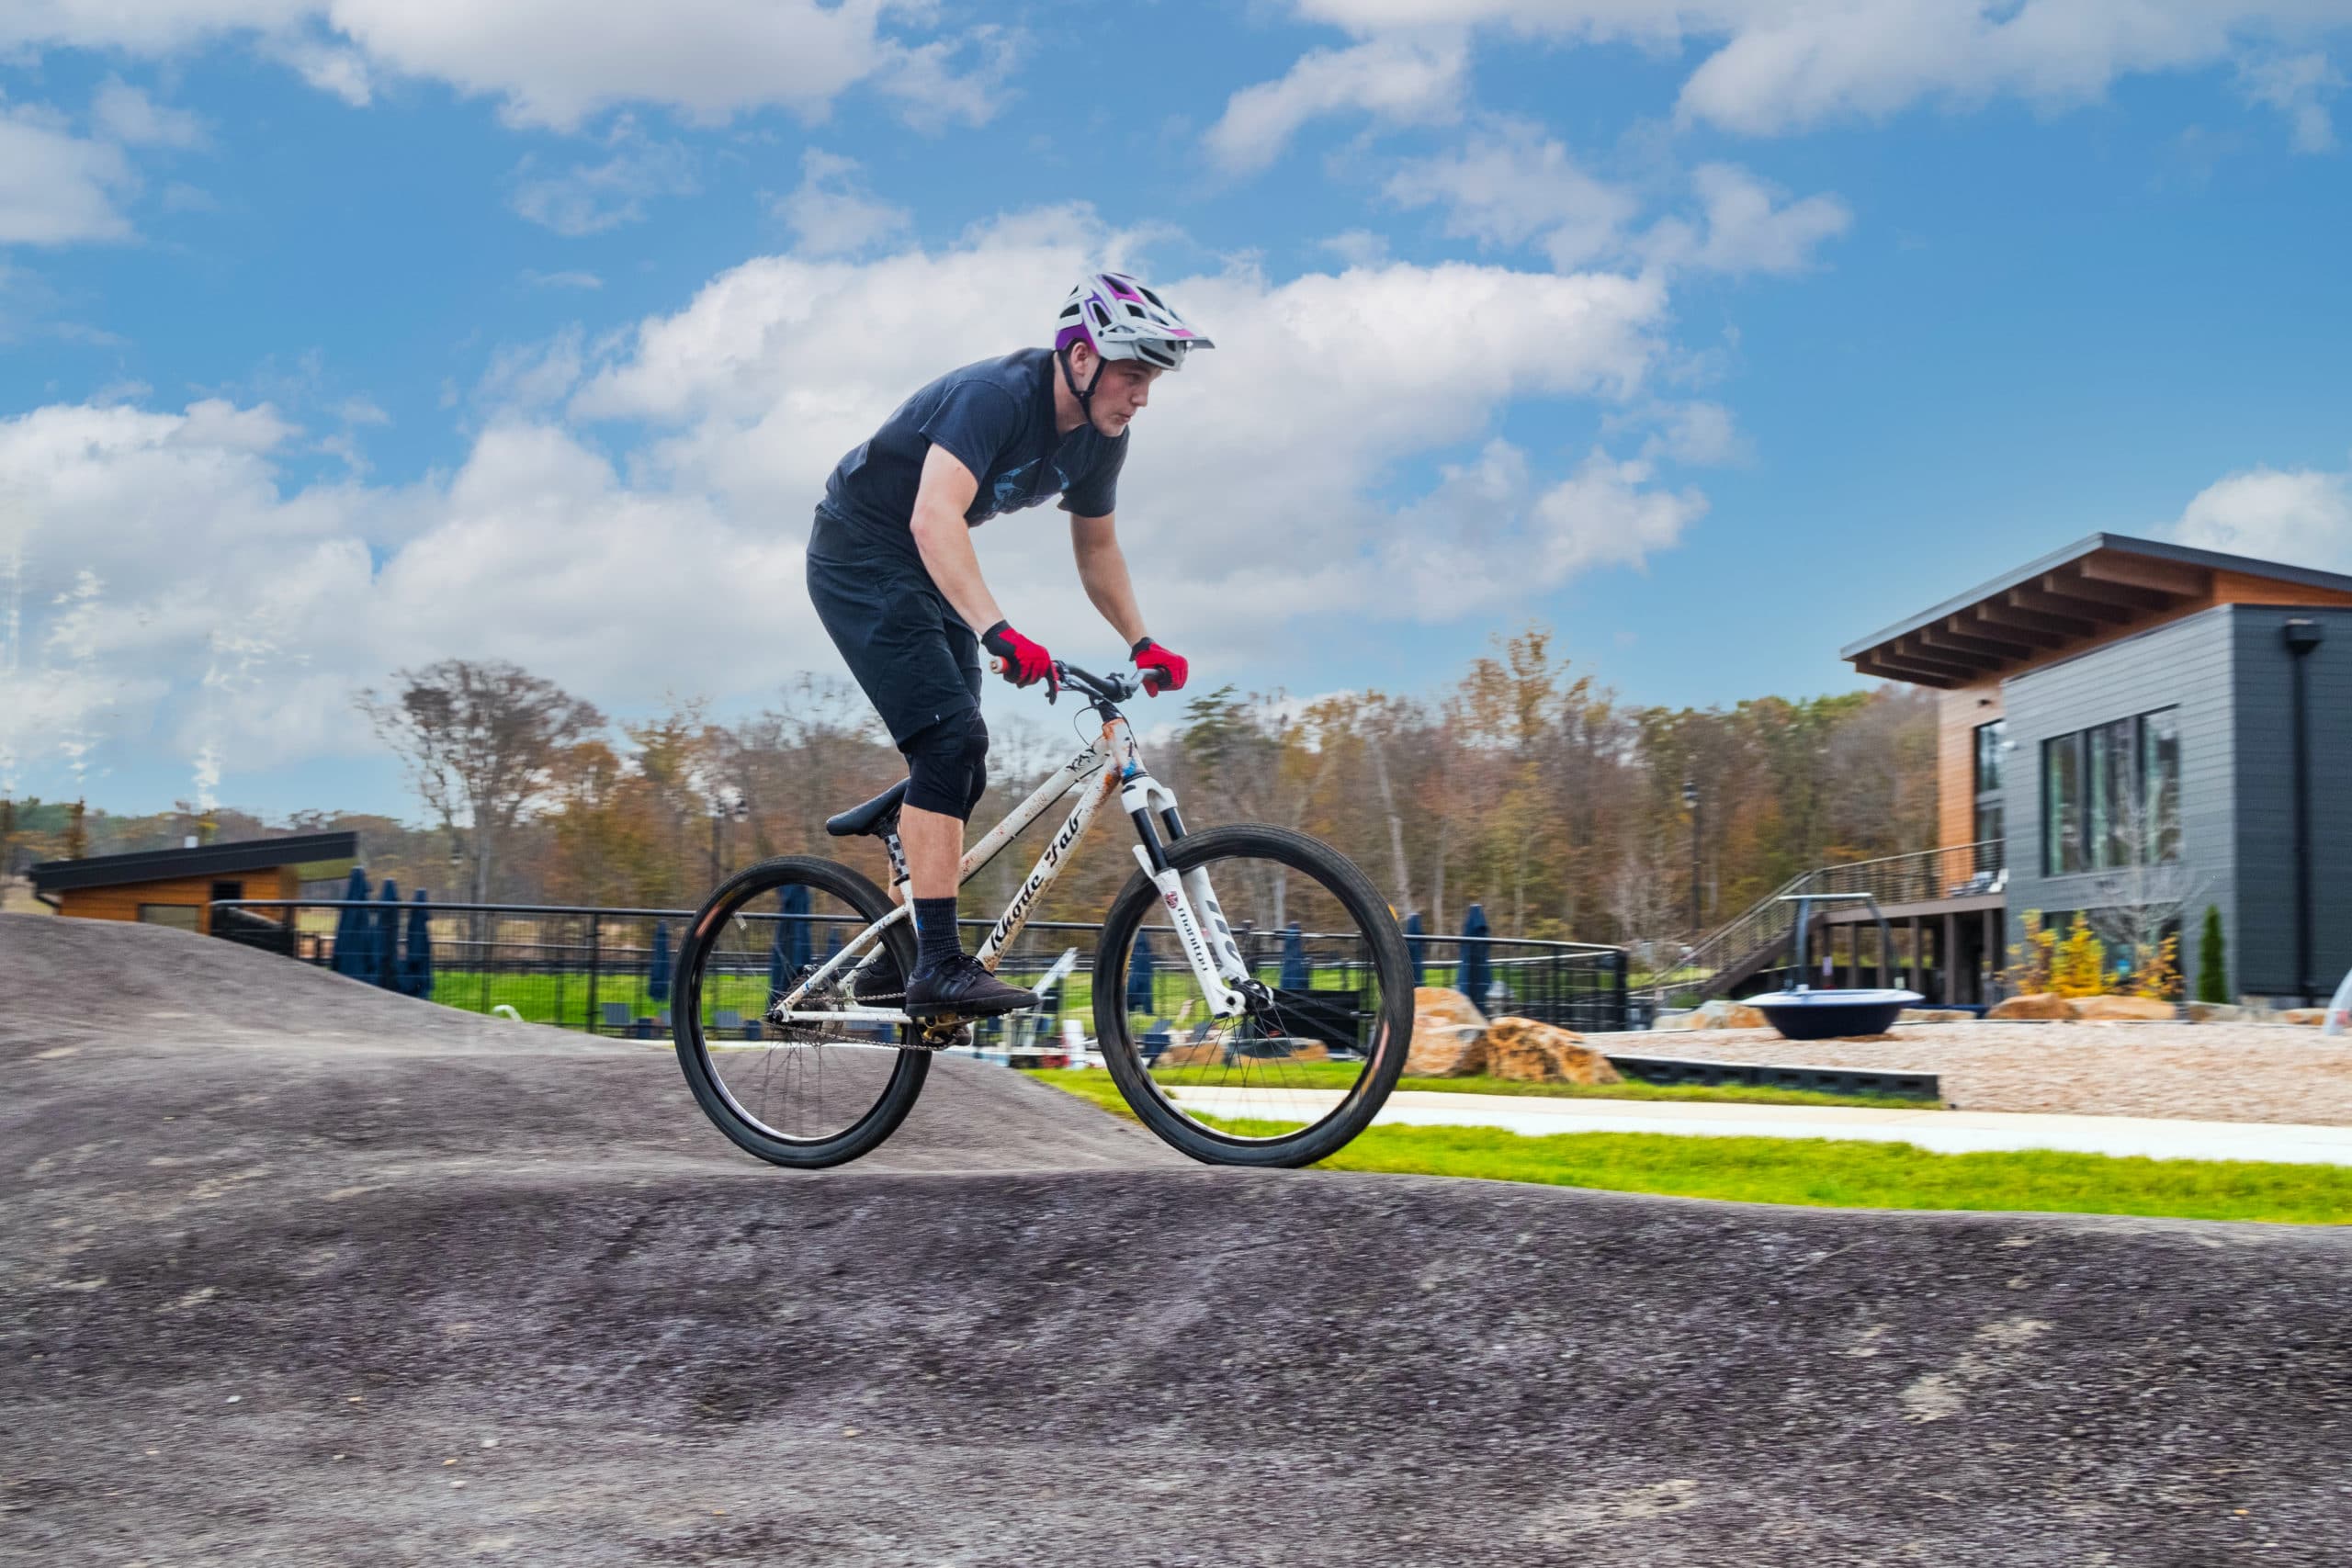 Enjoy the thrills of Watershed's bike pump track